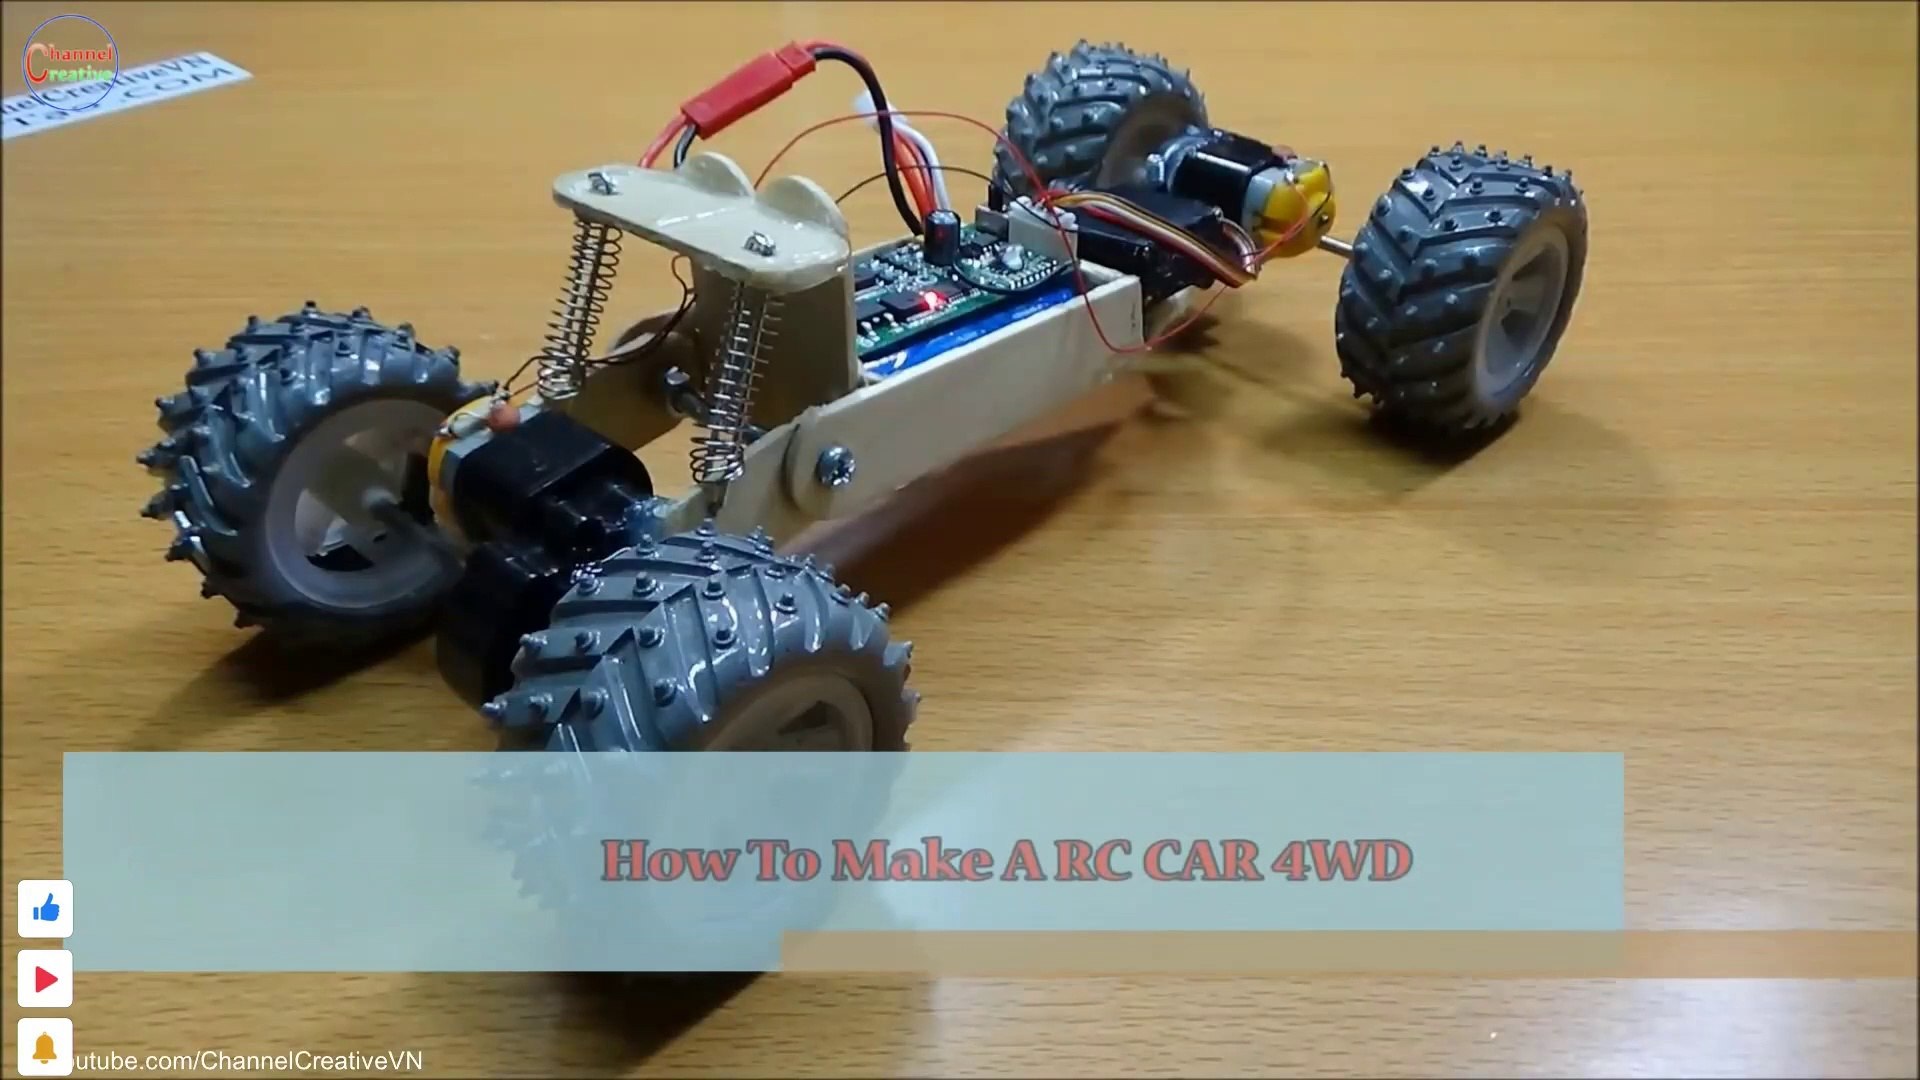 How To Build A Remote Control Car 4WD | Homemade RC Car - video Dailymotion